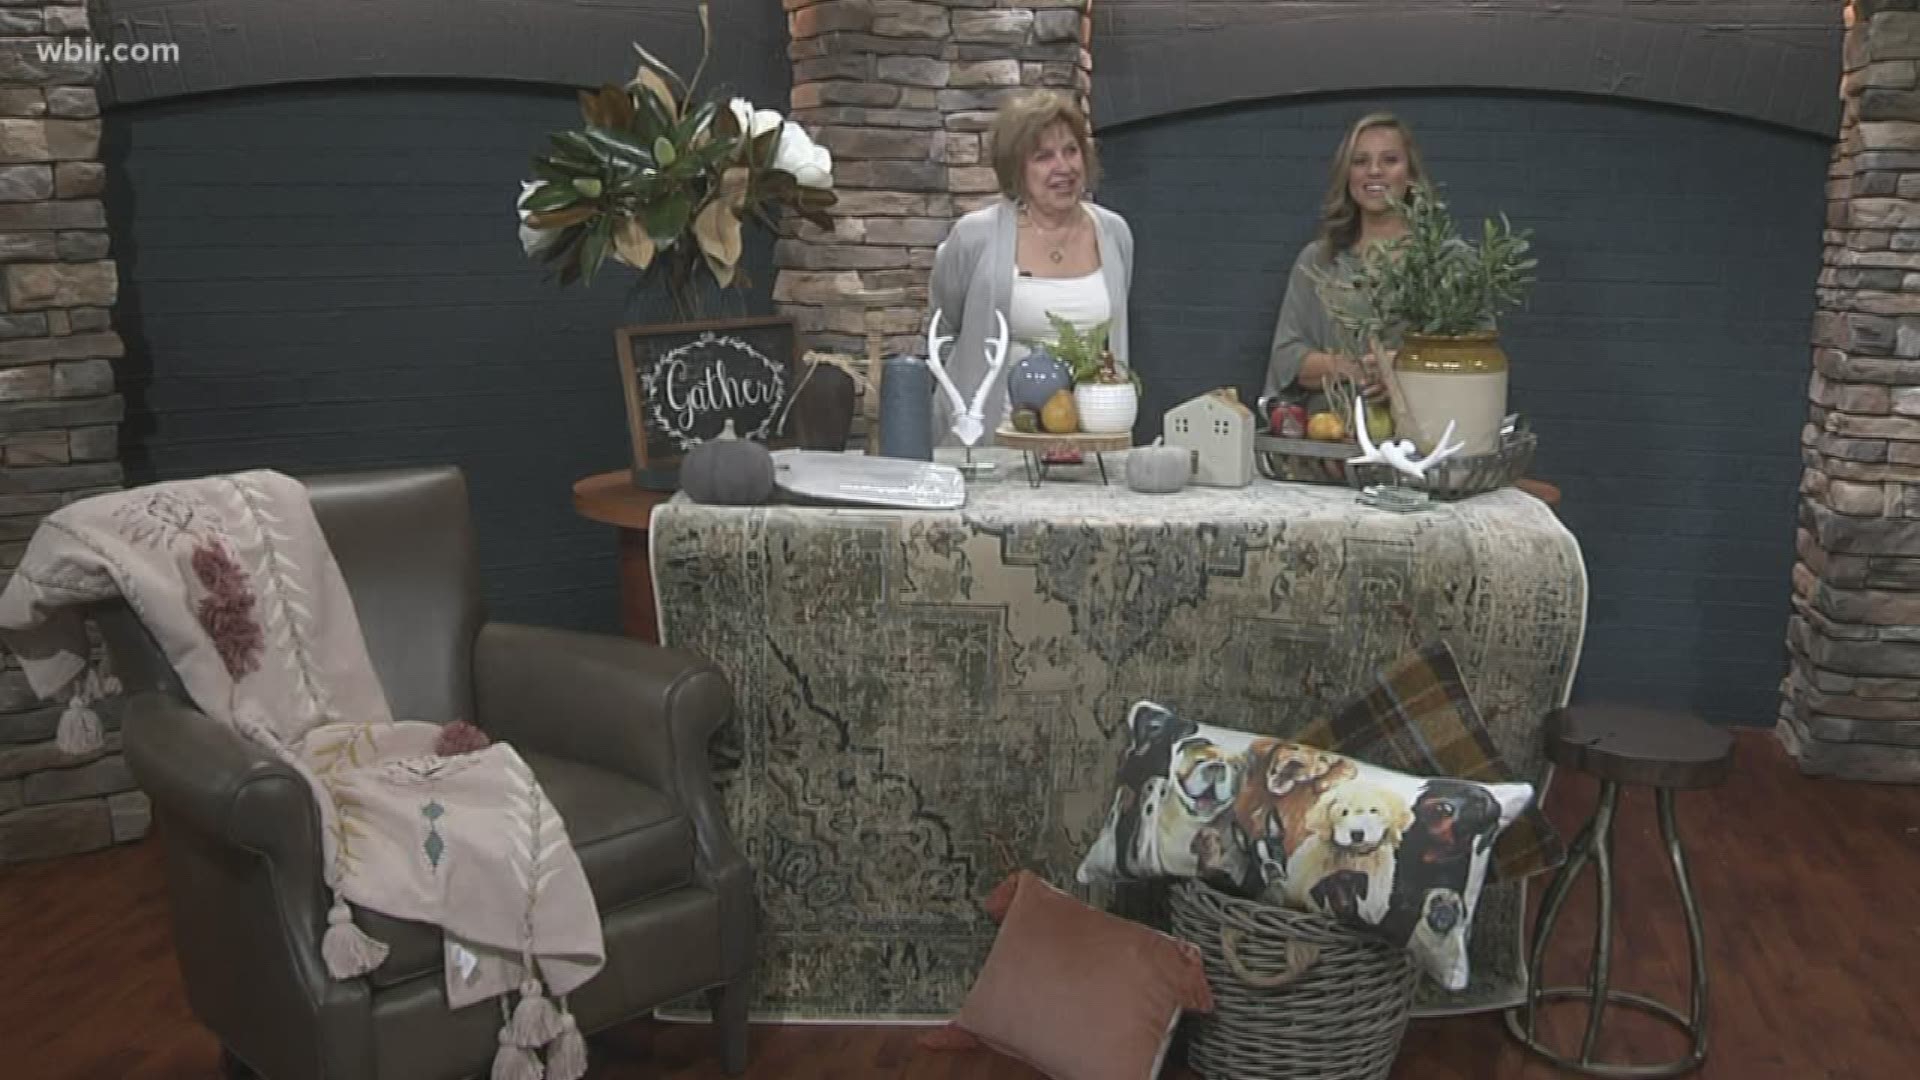 Diana Fox with Bliss Home tells us how to ease into our fall decorations.